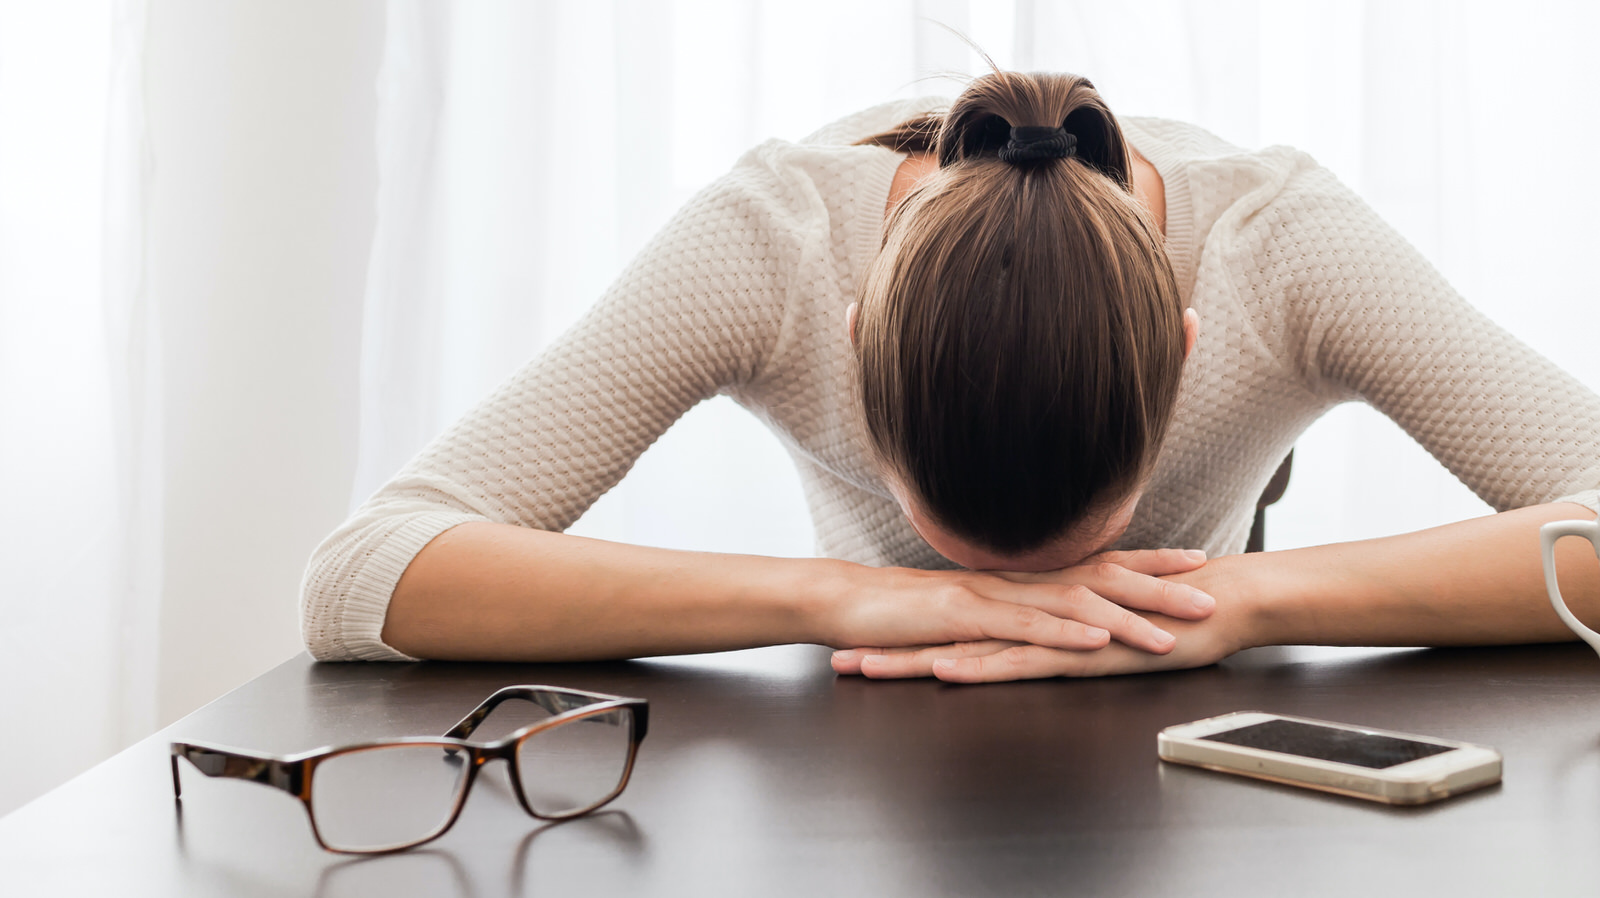 Is Your Audience Experiencing Feed Fatigue?